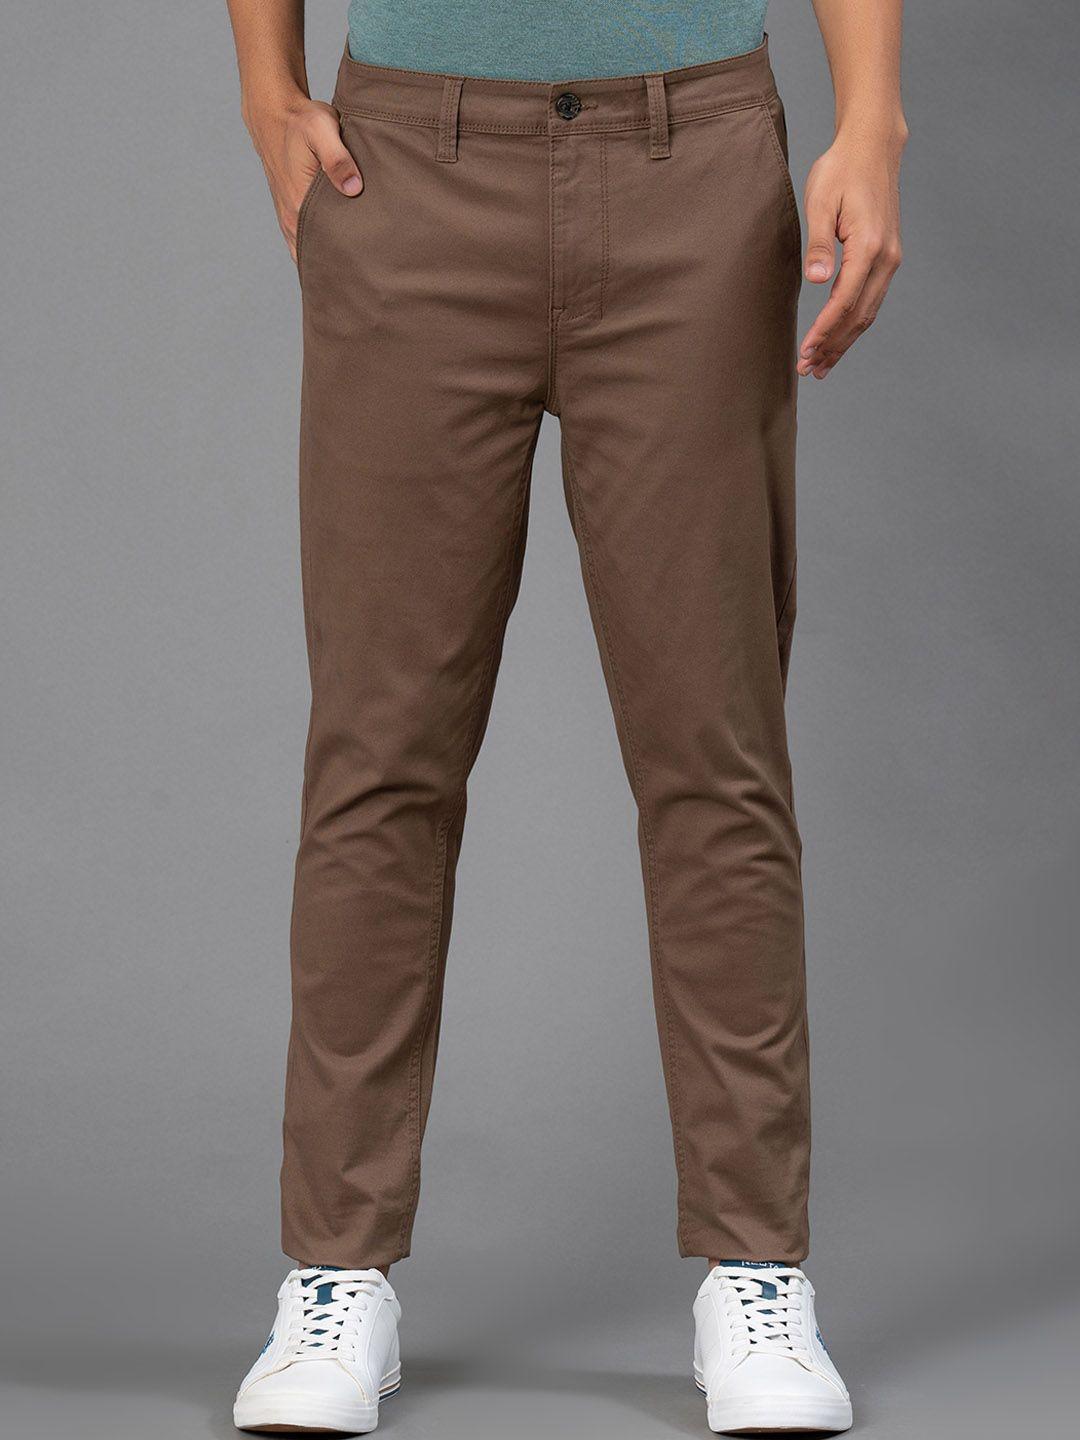 red-tape-men-mid-rise-skinny-fit-trousers